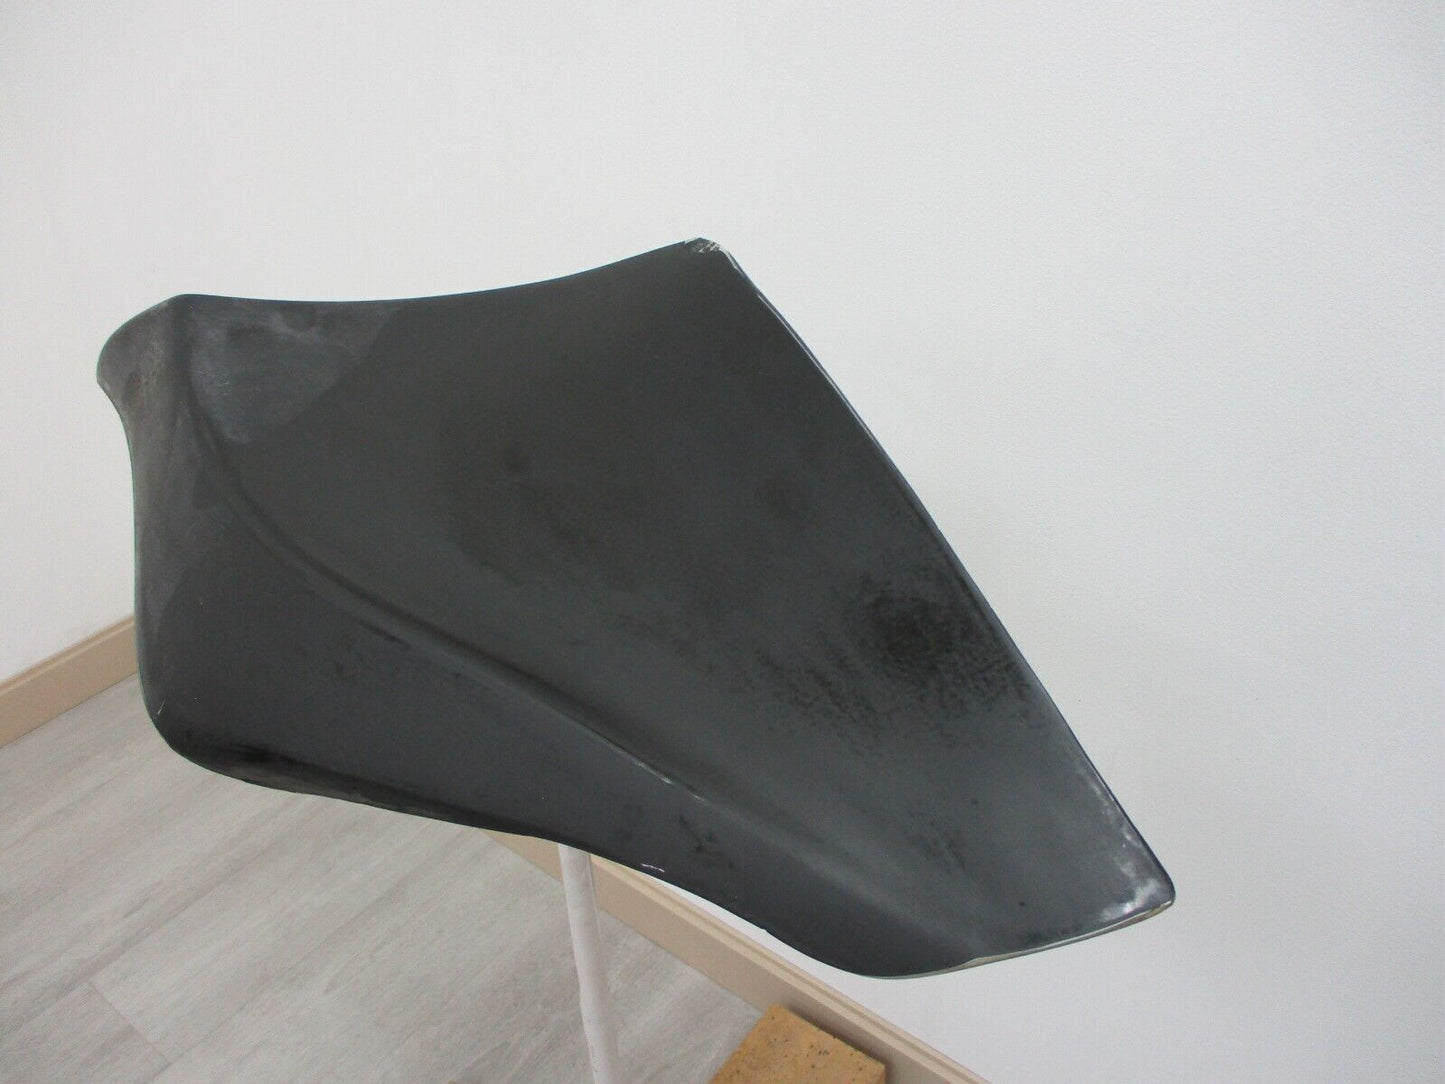 09 + Later Scalloped and Extended Fibreglass Sidecover RL38